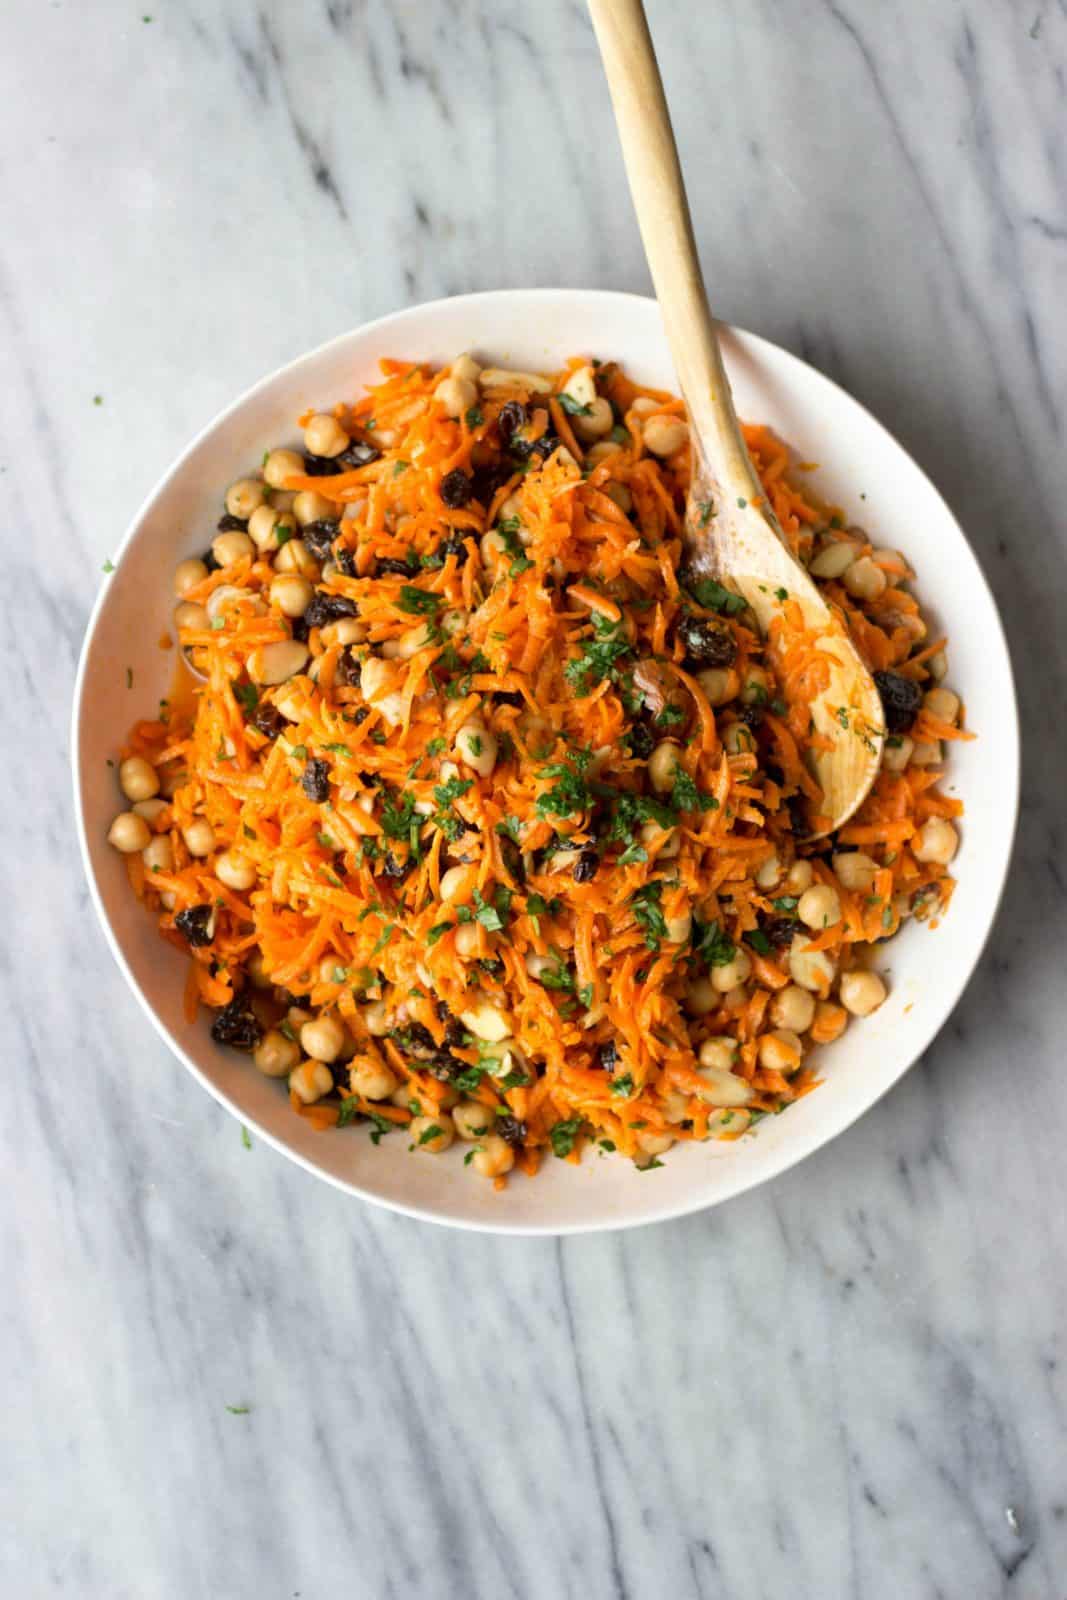 Carrot, Chickpea and Raisin Salad - The Healthy Epicurean